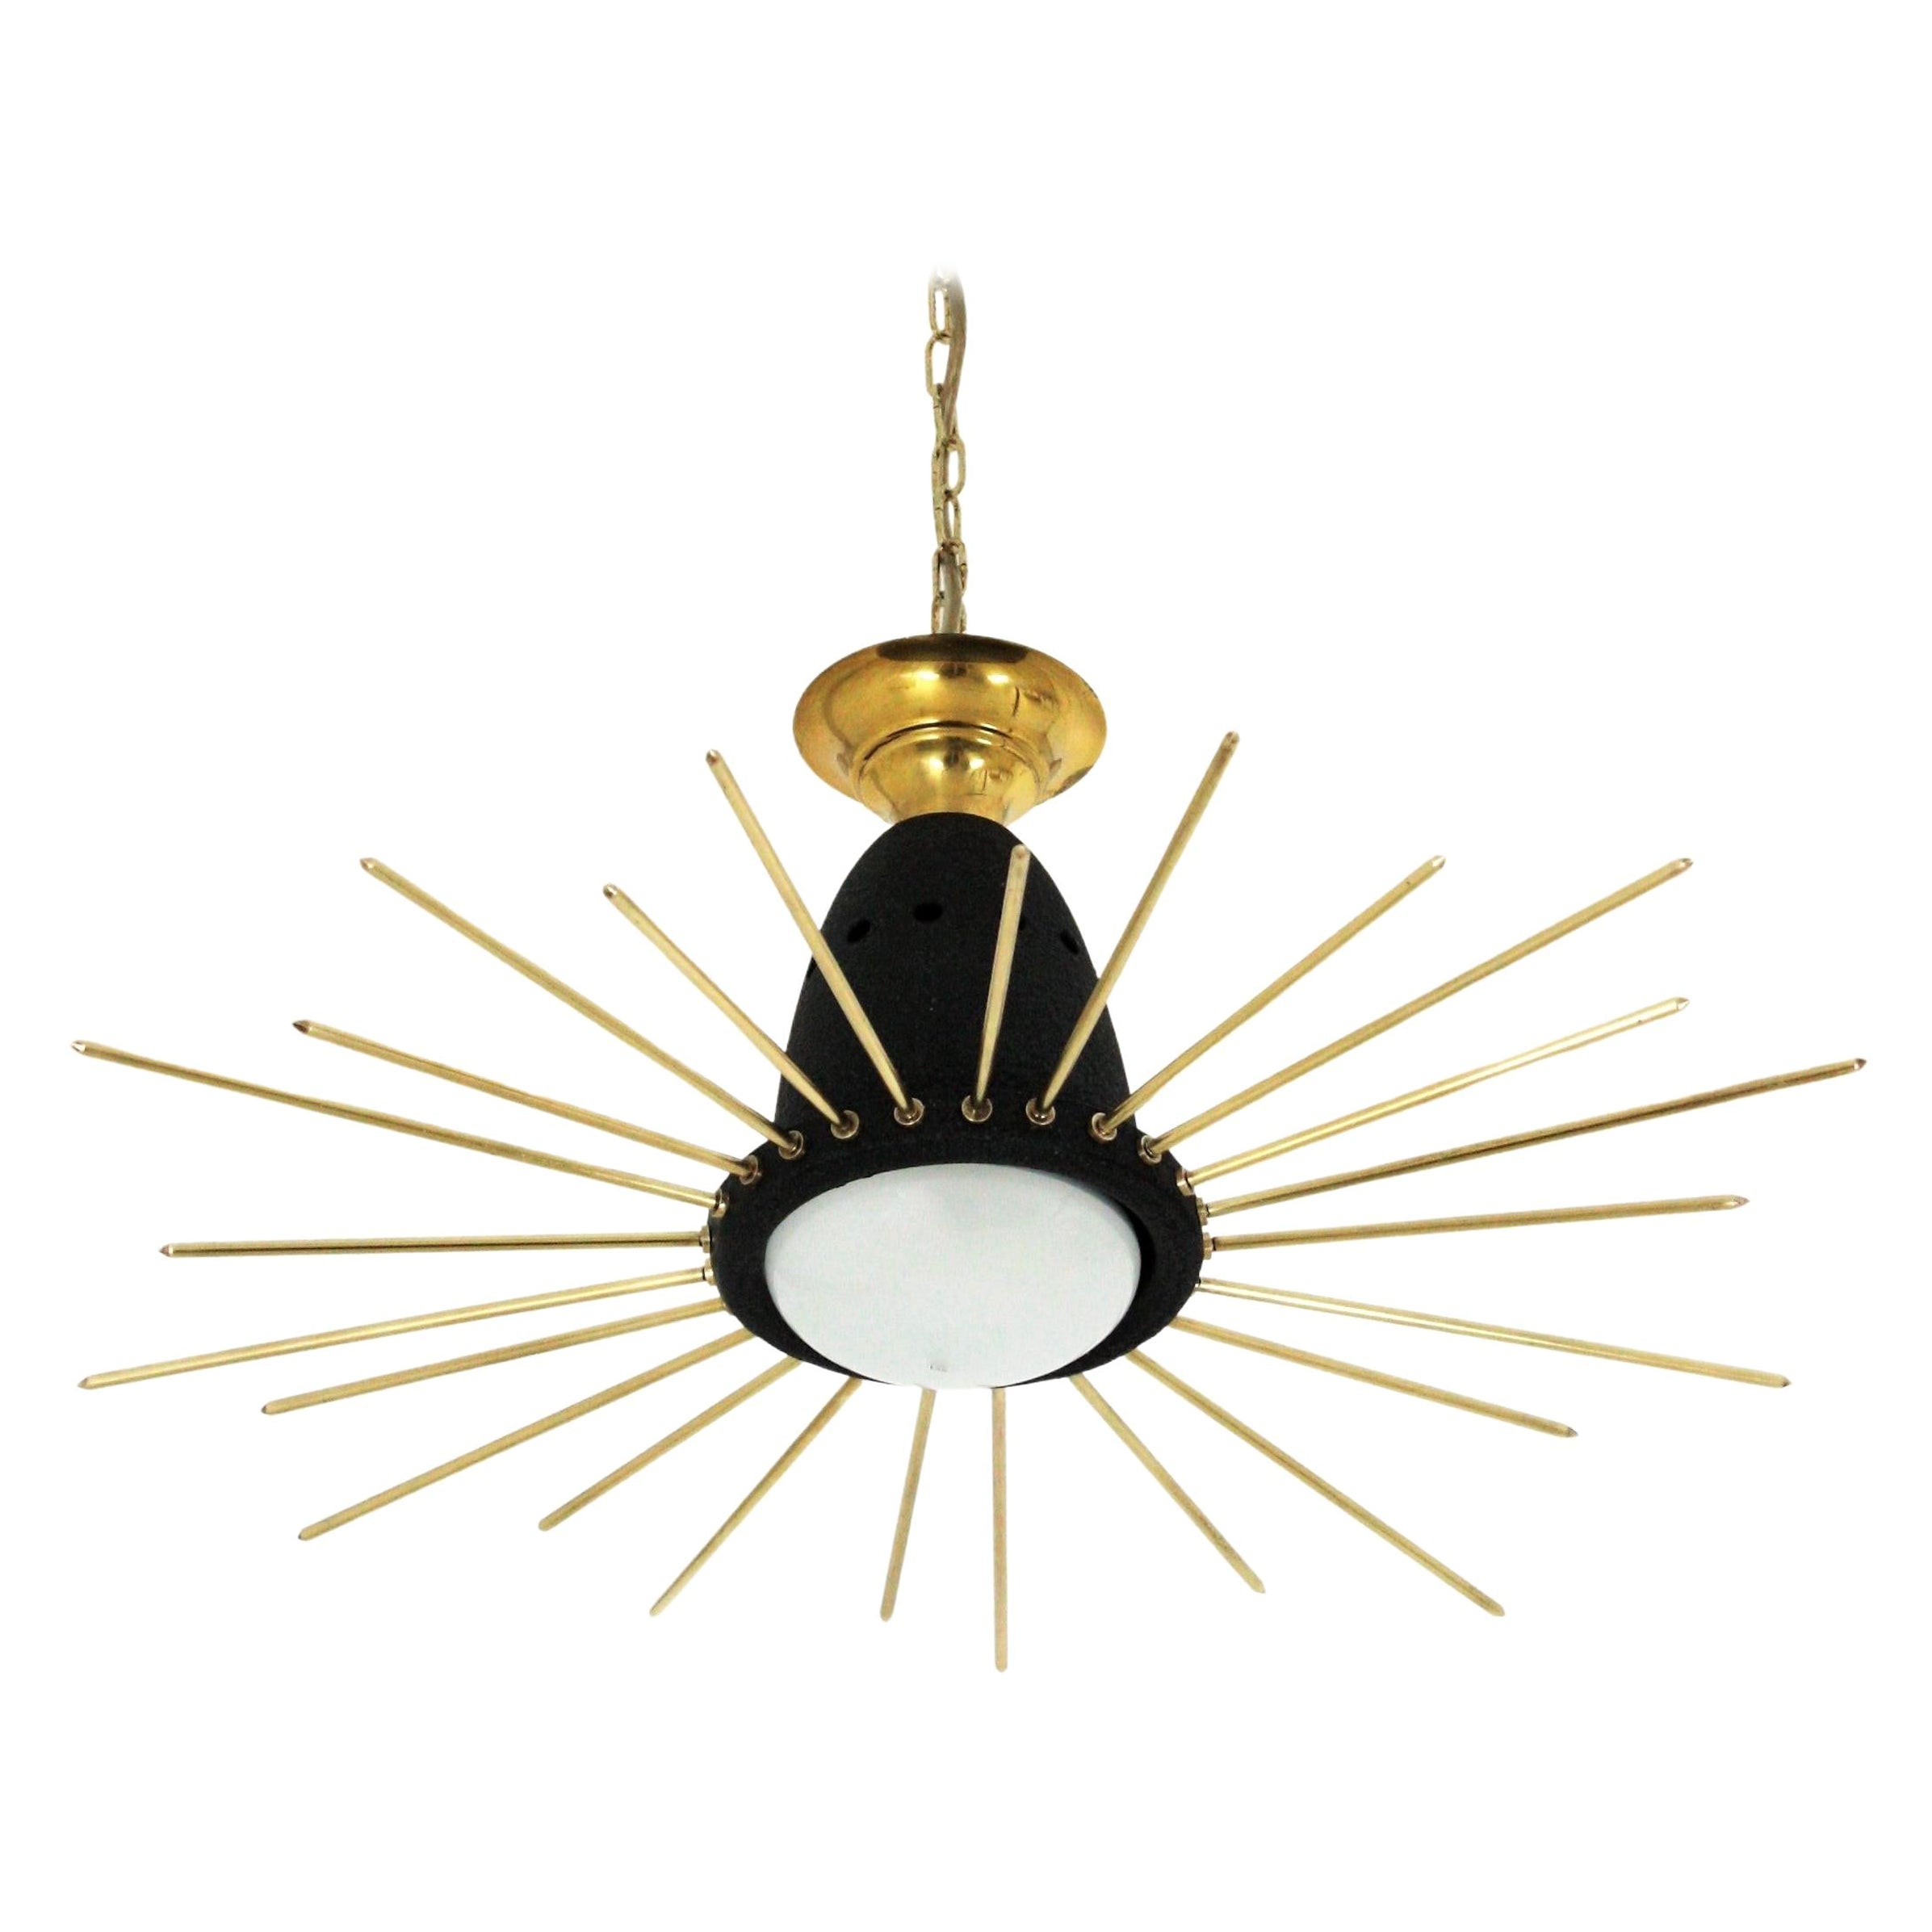 Mid-Century Modern black lacquered metal and brass sunburst suspension light or light fixture, Italy, 1950s.
This eye-catching ceiling lamp features a black lacquered metal shade topped with a brass canopy and surrounded by brass rays in two sizes.